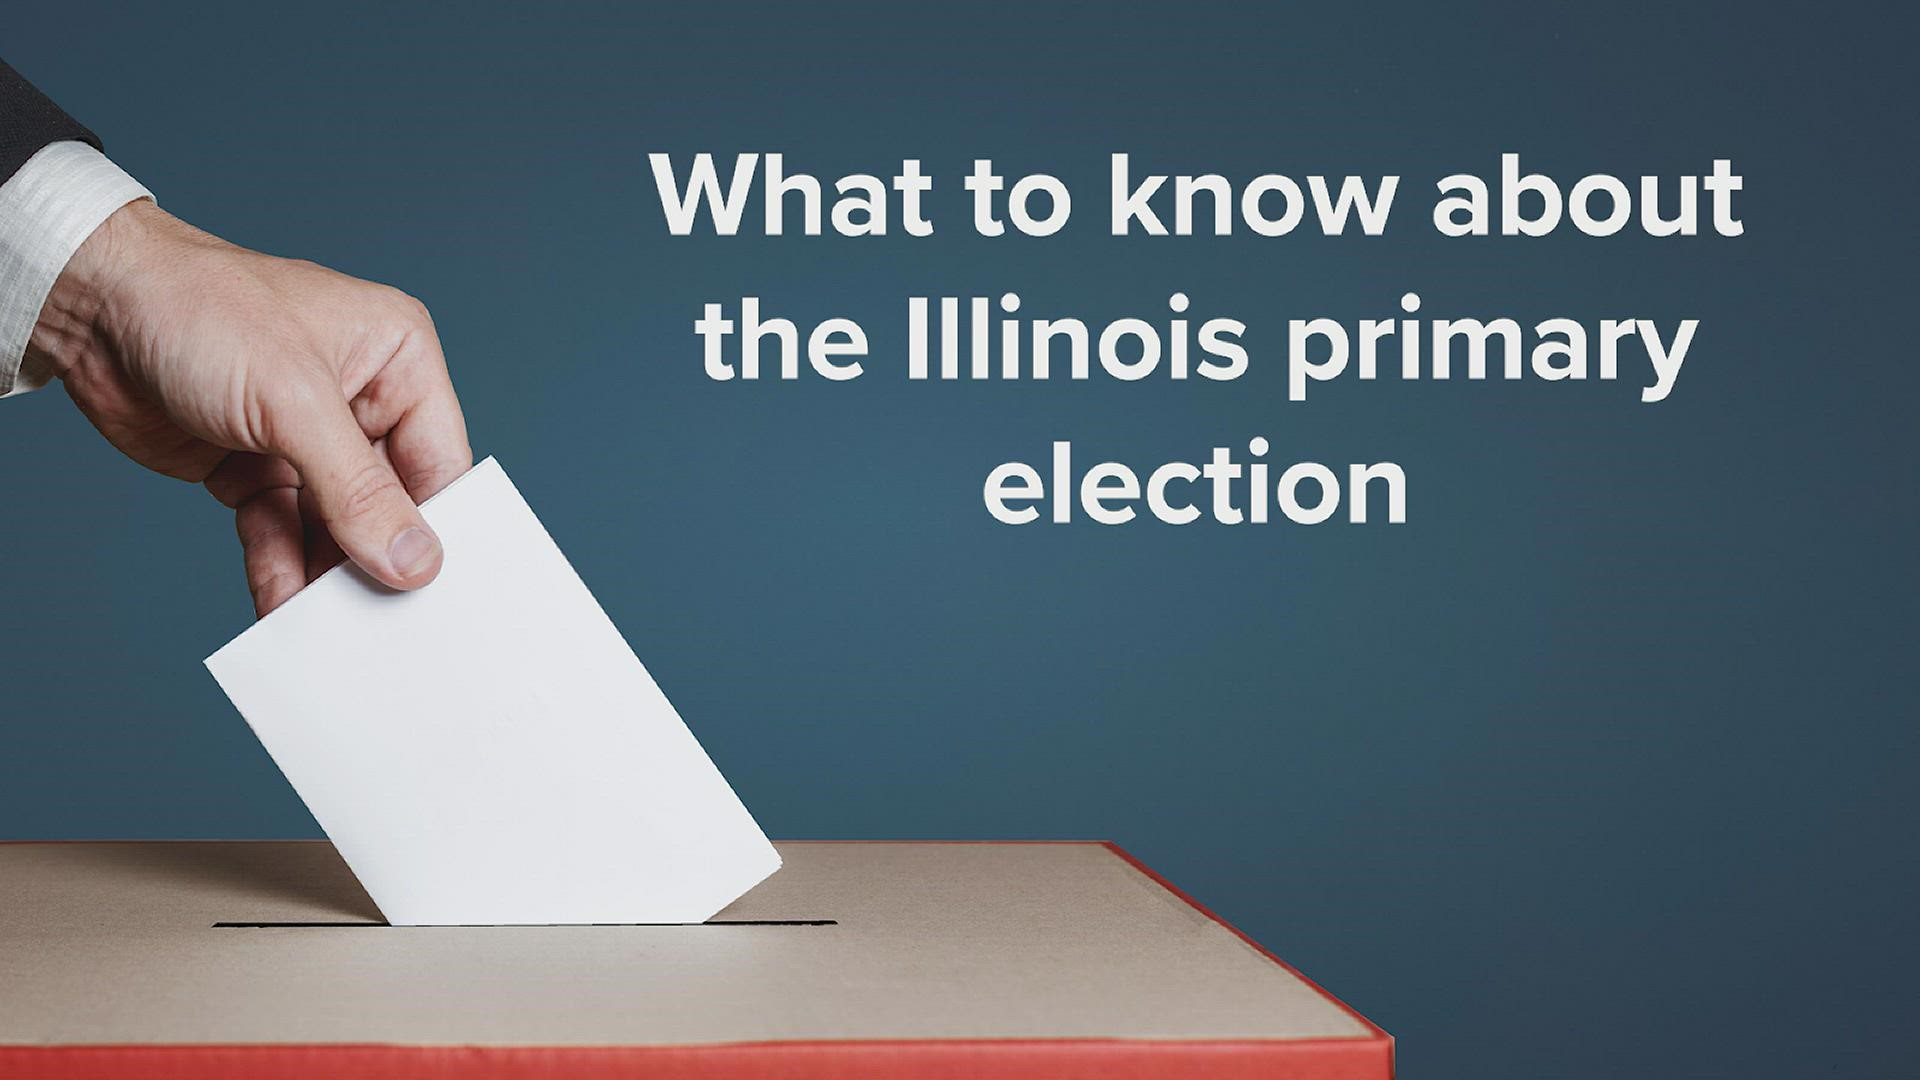 The Illinois primary election is Tuesday, June 28. Here’s a quick look at what you need to know before heading to the polls.